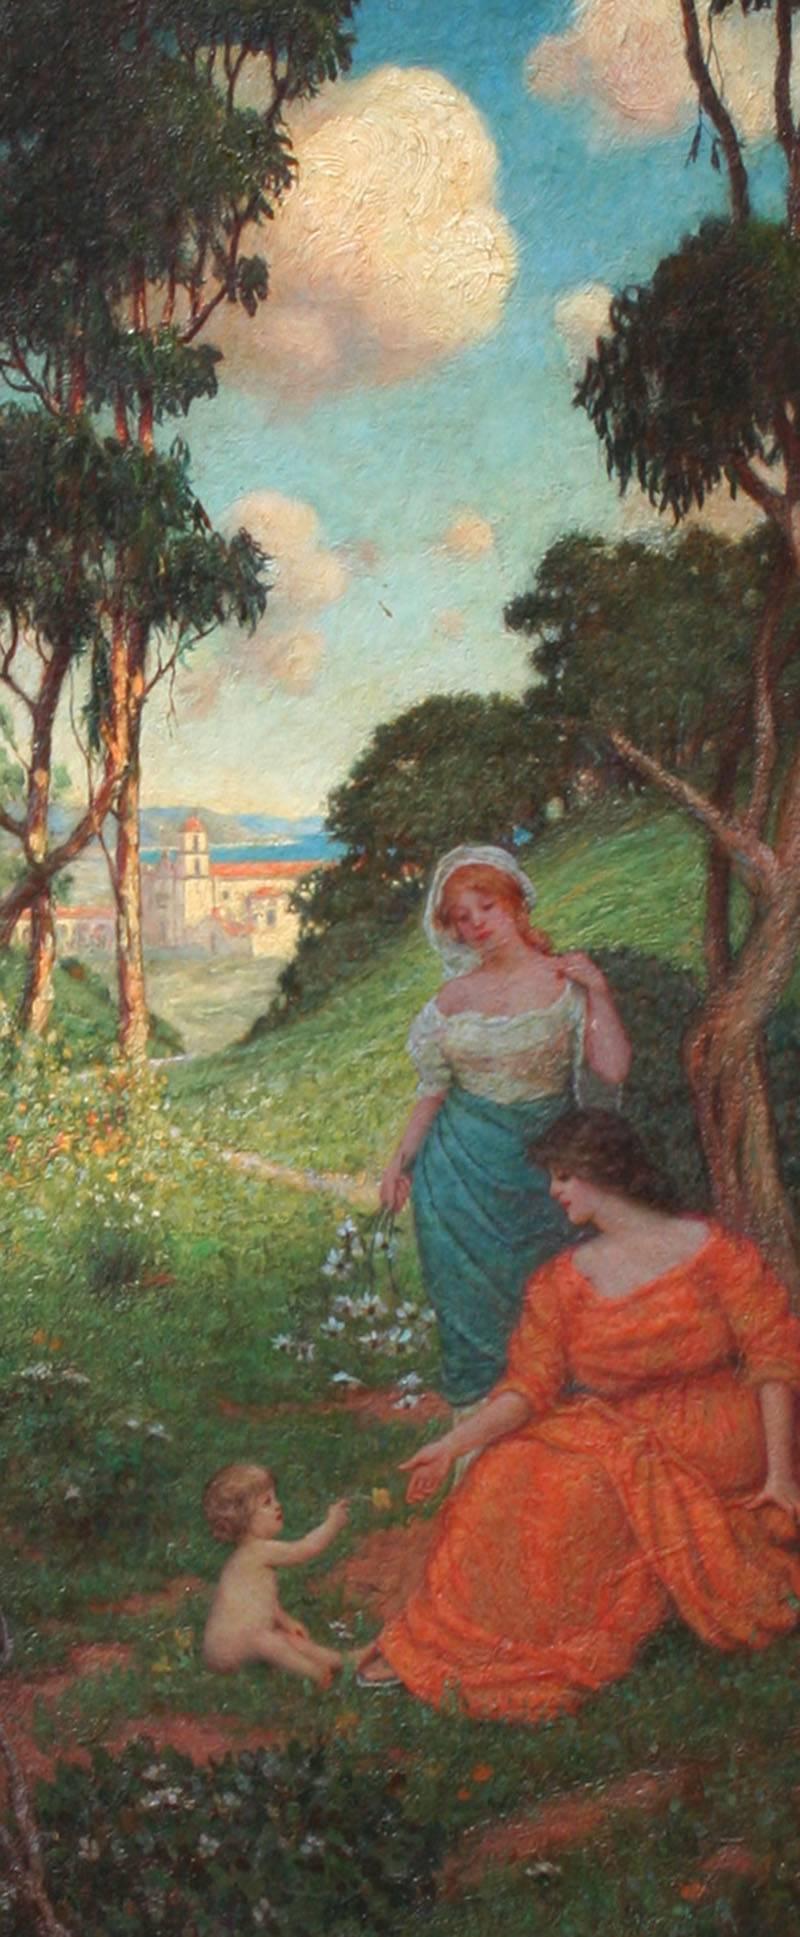 “California Idyll, Santa Barbara Mission” is an original oil painting on board created circa 1920's by early California  Impressionist artist Clark Hobart (1868 – 1948).  The work measures 19 x 8 inches unframed, and 26 x 15 x 1.5 inches in a hand